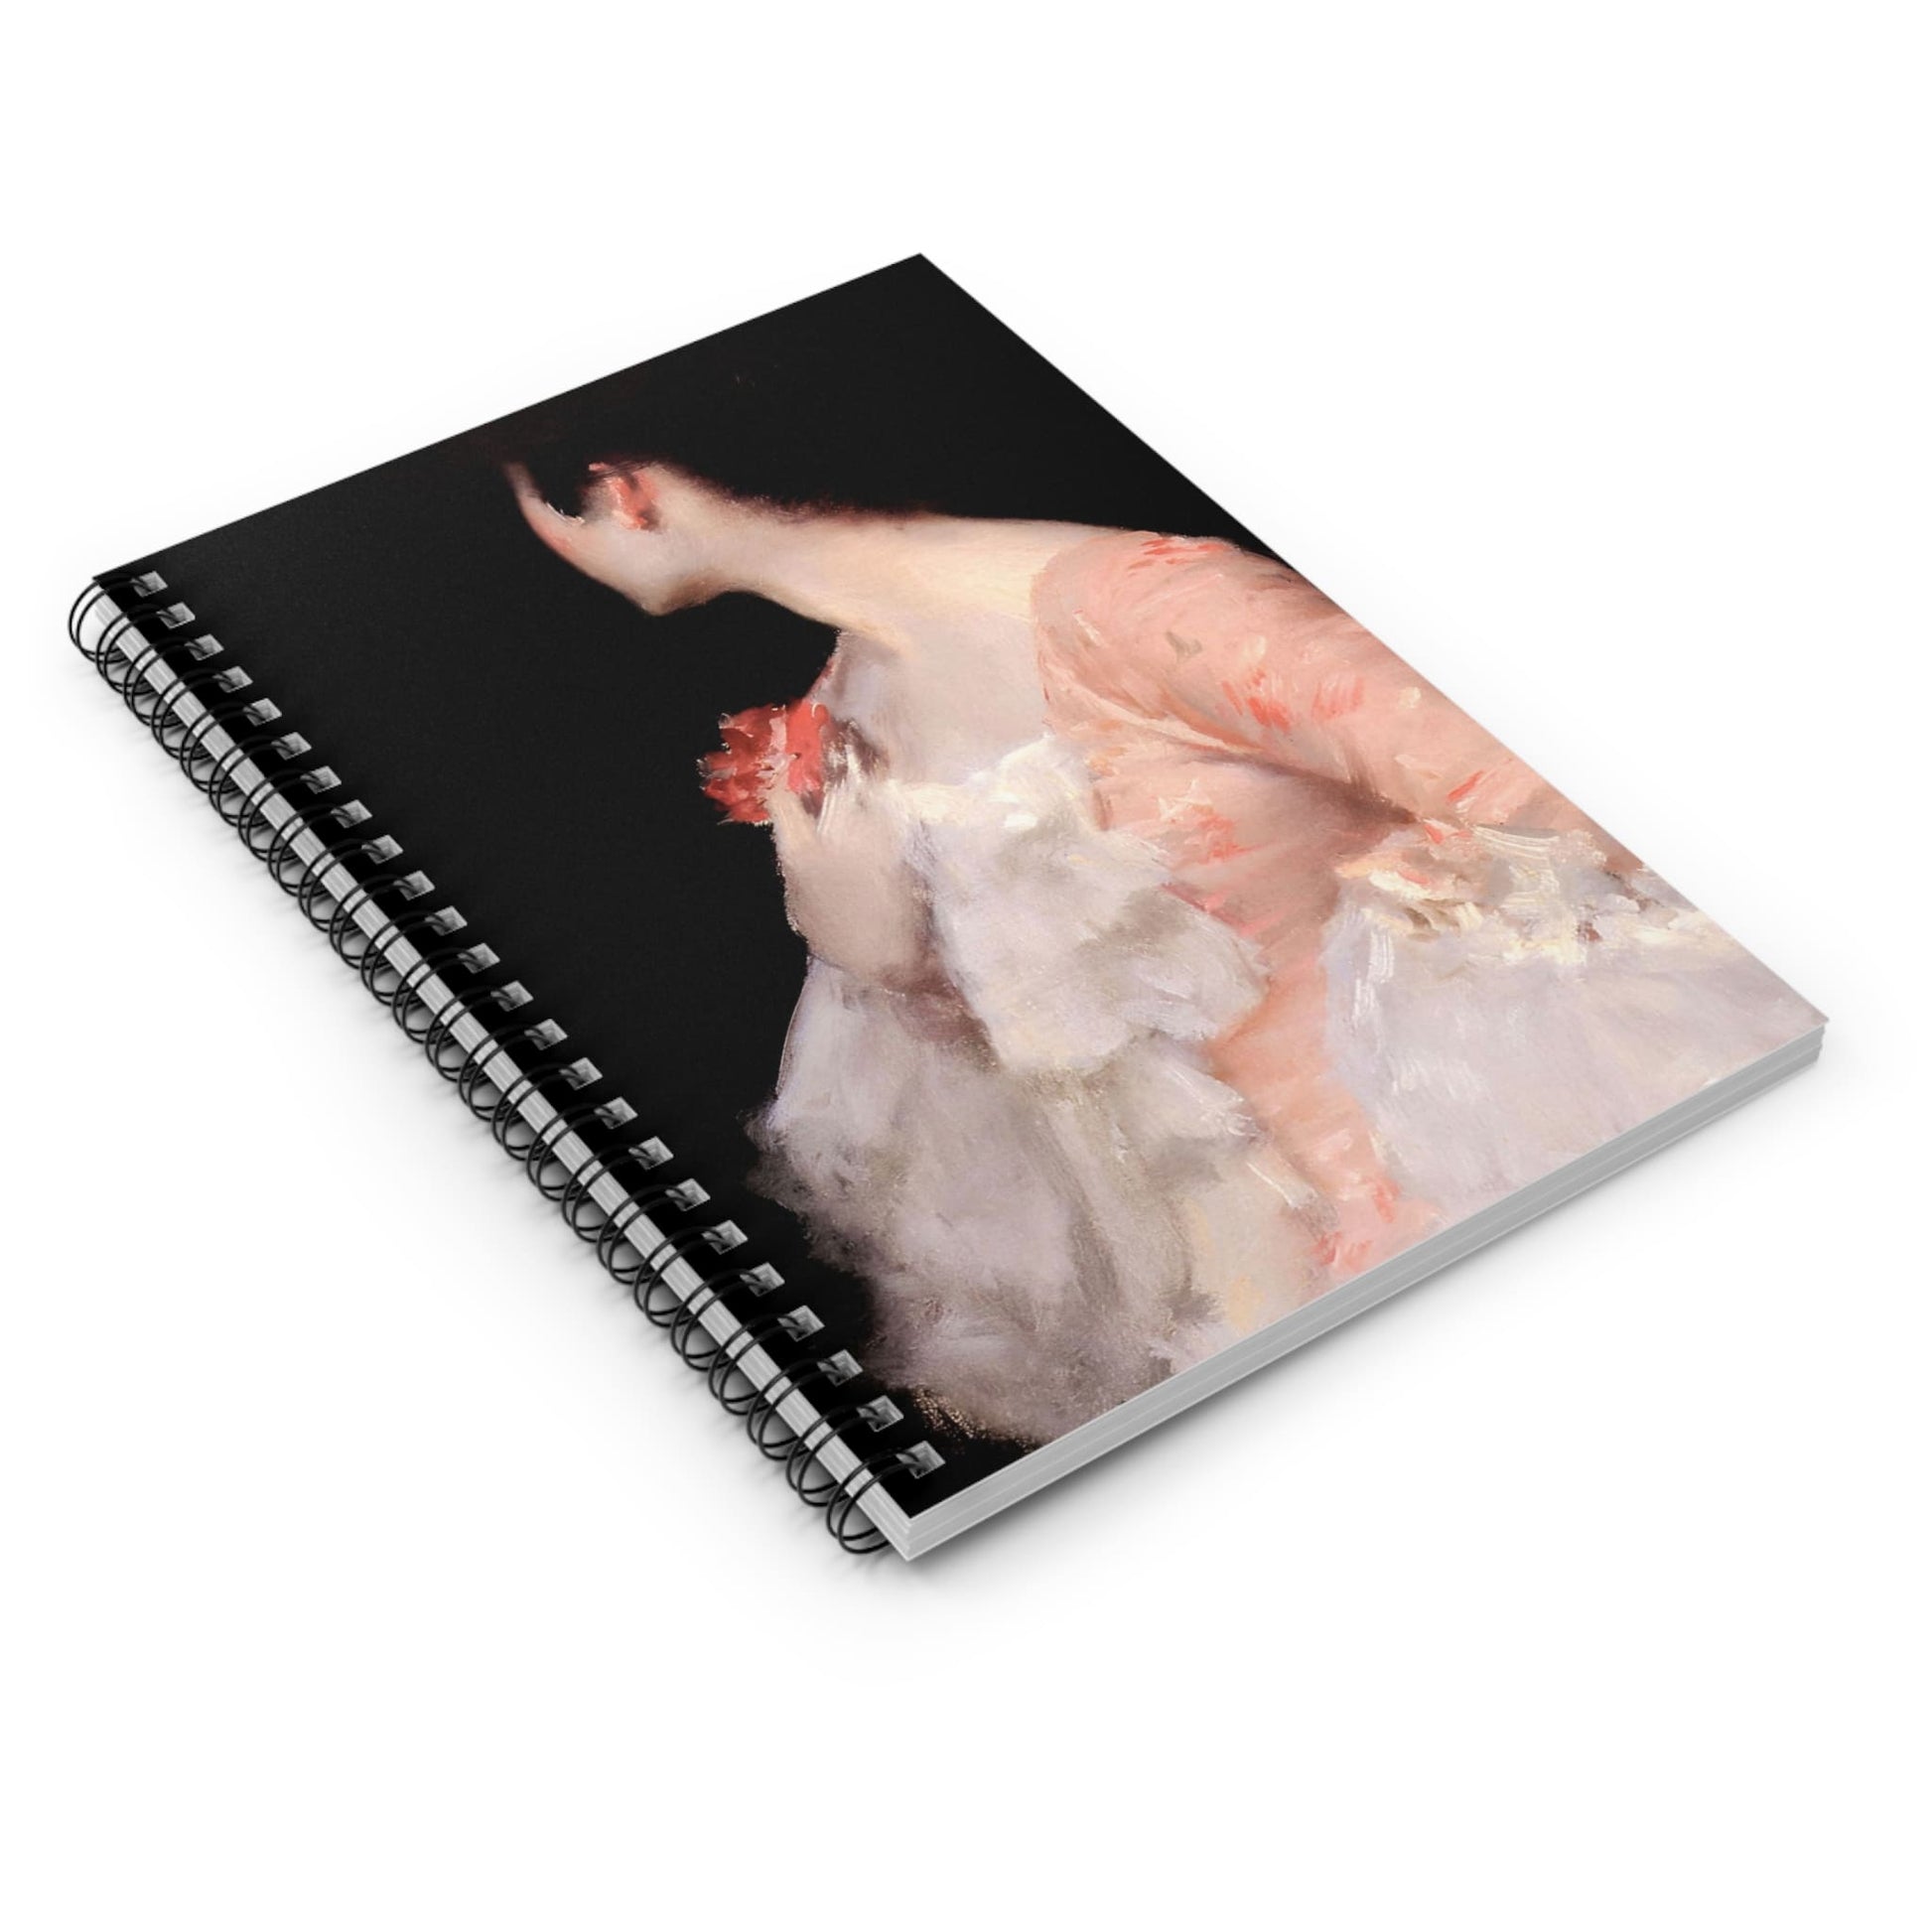 Posing in Pink Spiral Notebook Laying Flat on White Surface